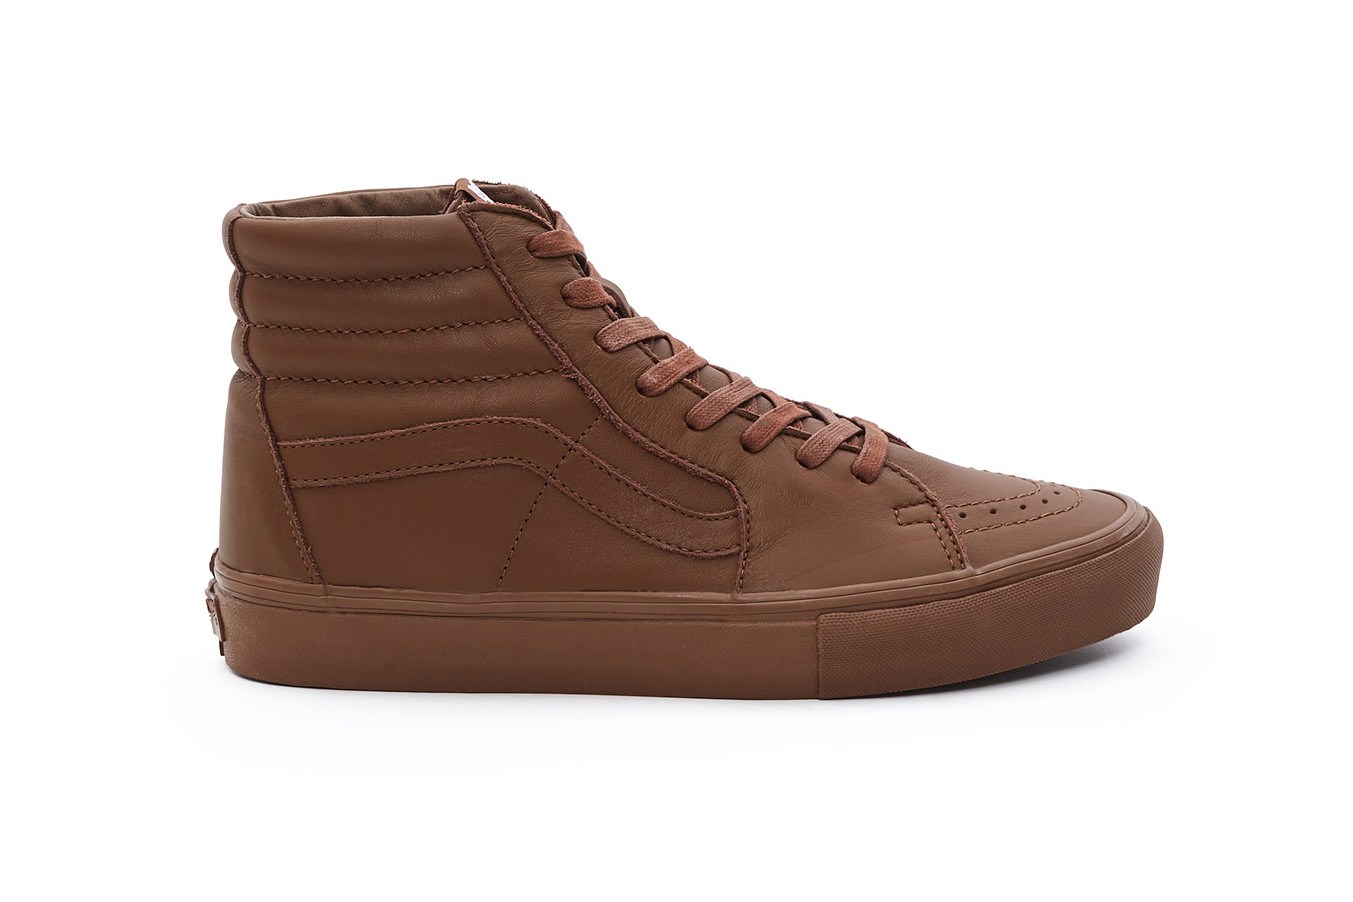 opening-ceremony-vans-leather-mono-pack-6